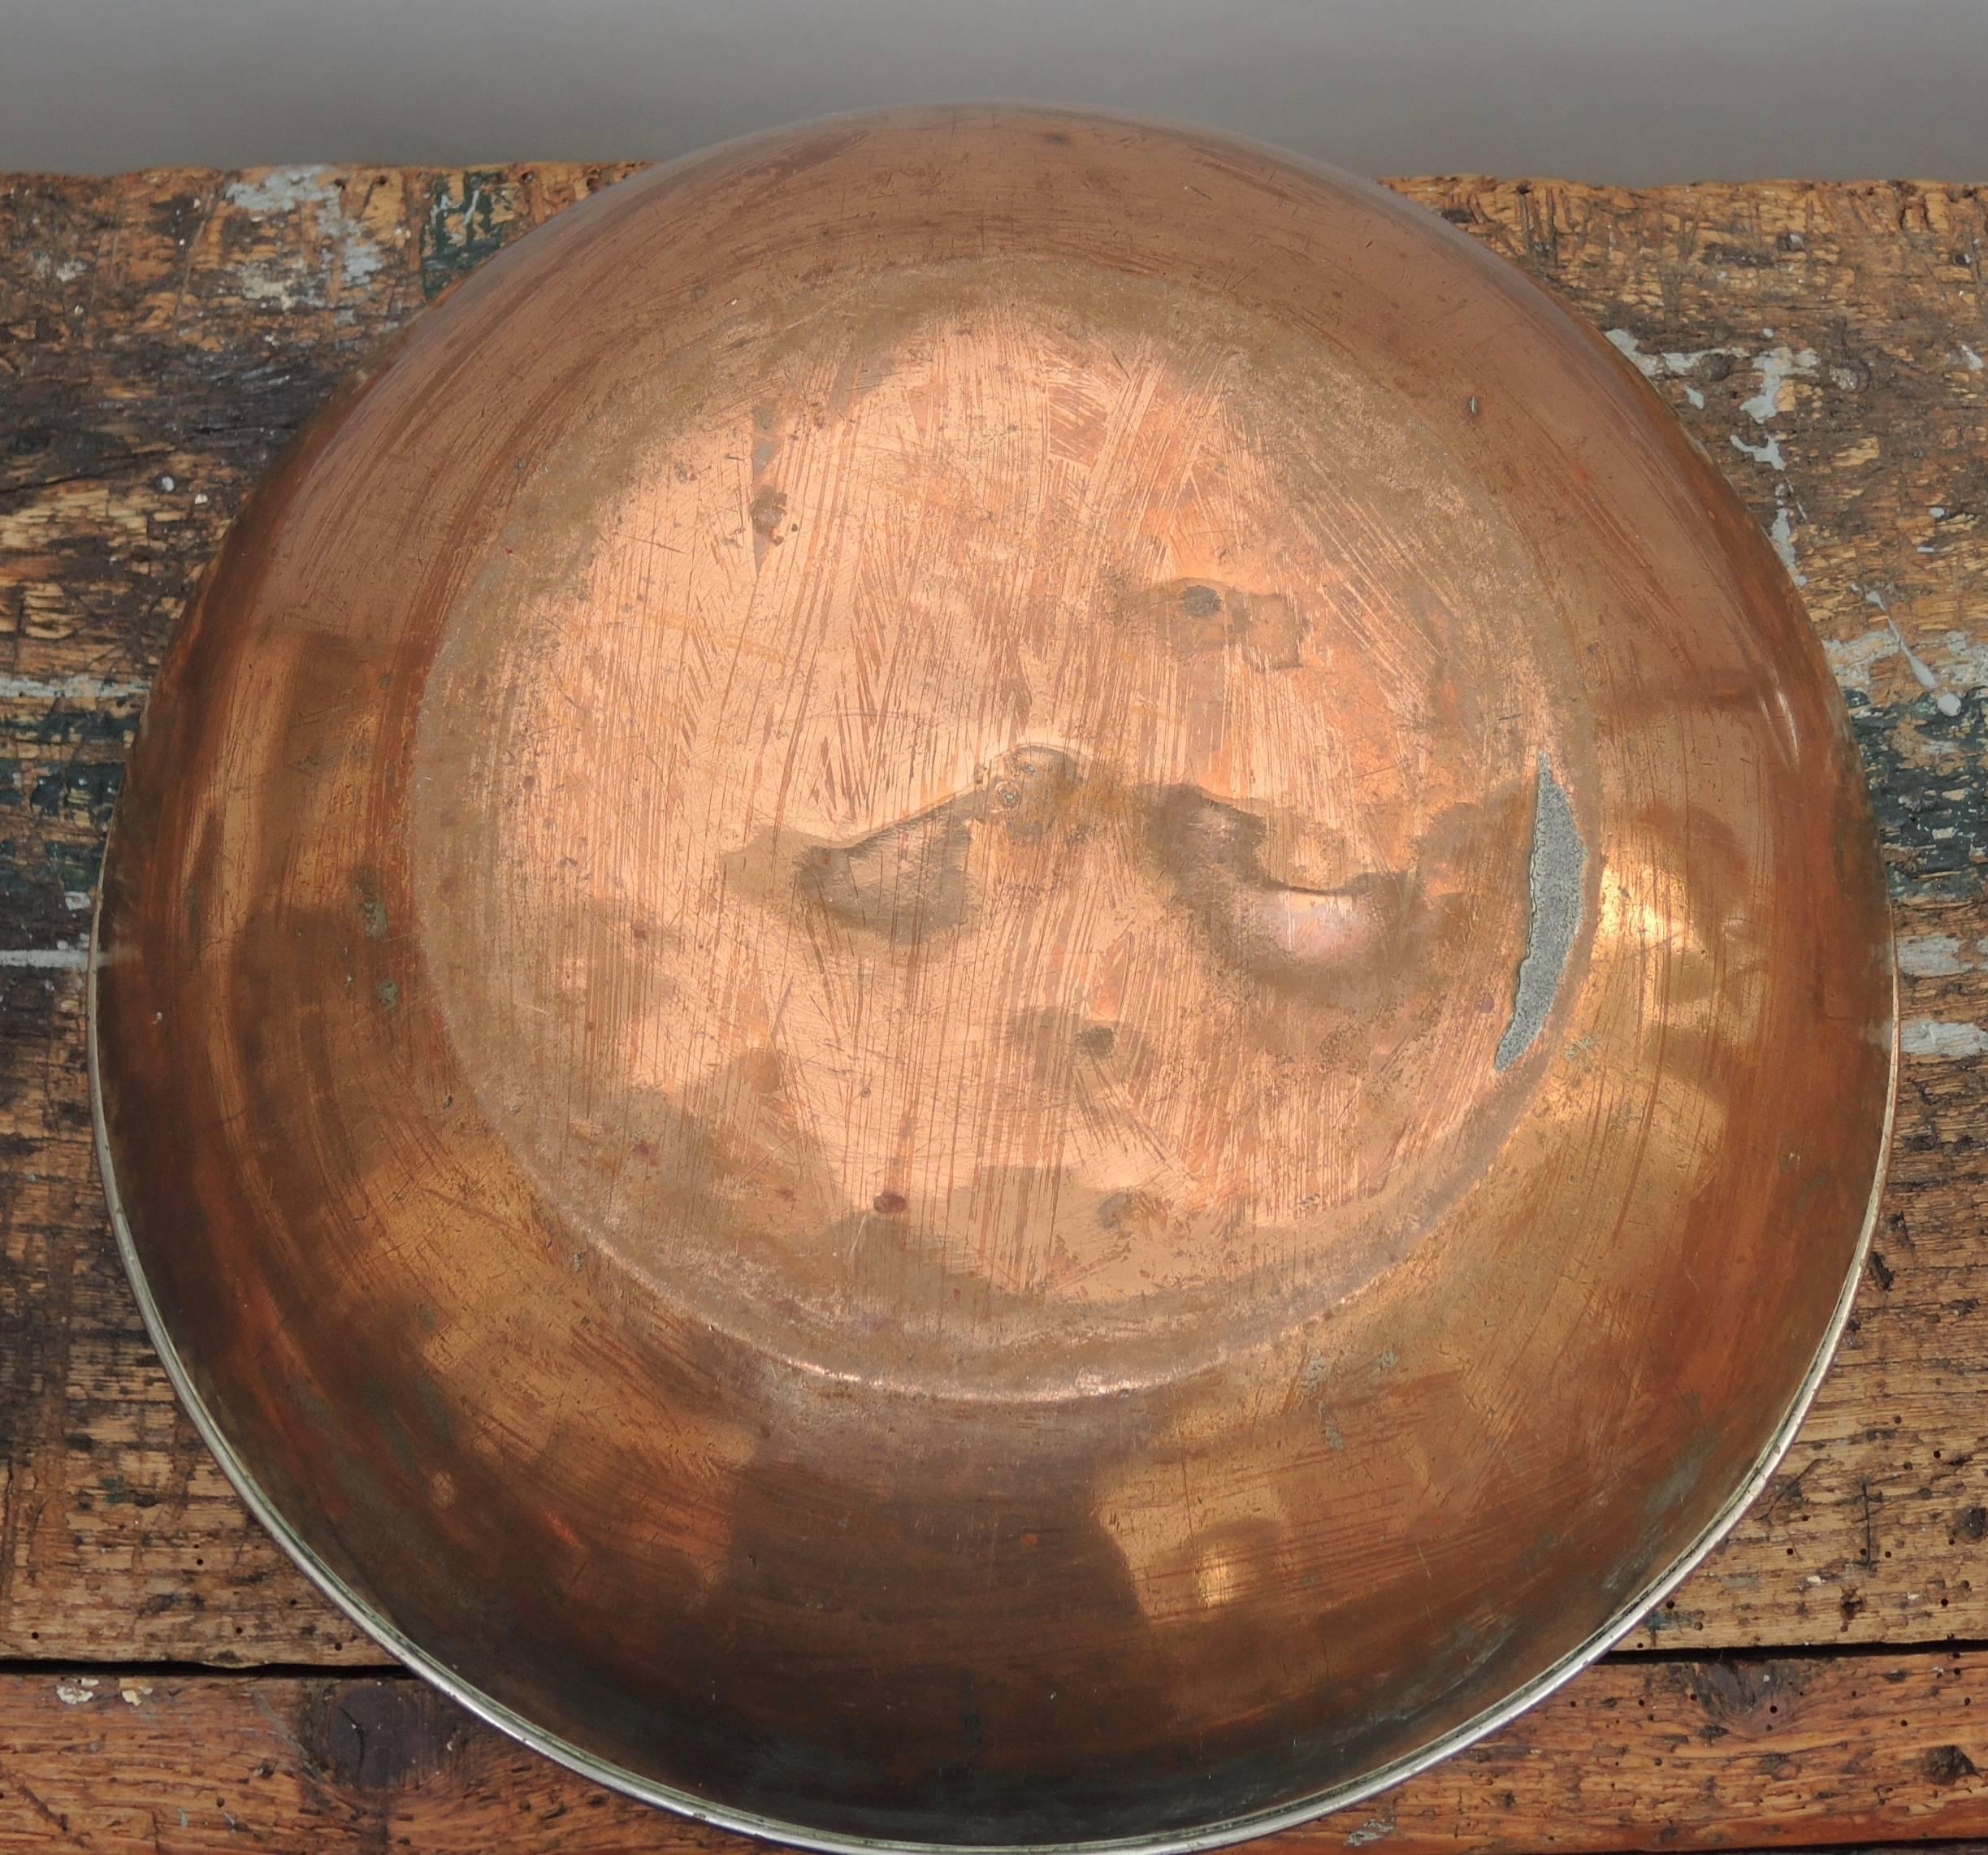 A large copper bowl used by chefs to mix ingredients such as egg whites for the perfect meringue. A copper bowl is equal to no other when mashing potatoes to a Fine froth or whipping heavy cream .French chefs learn both the art and science of